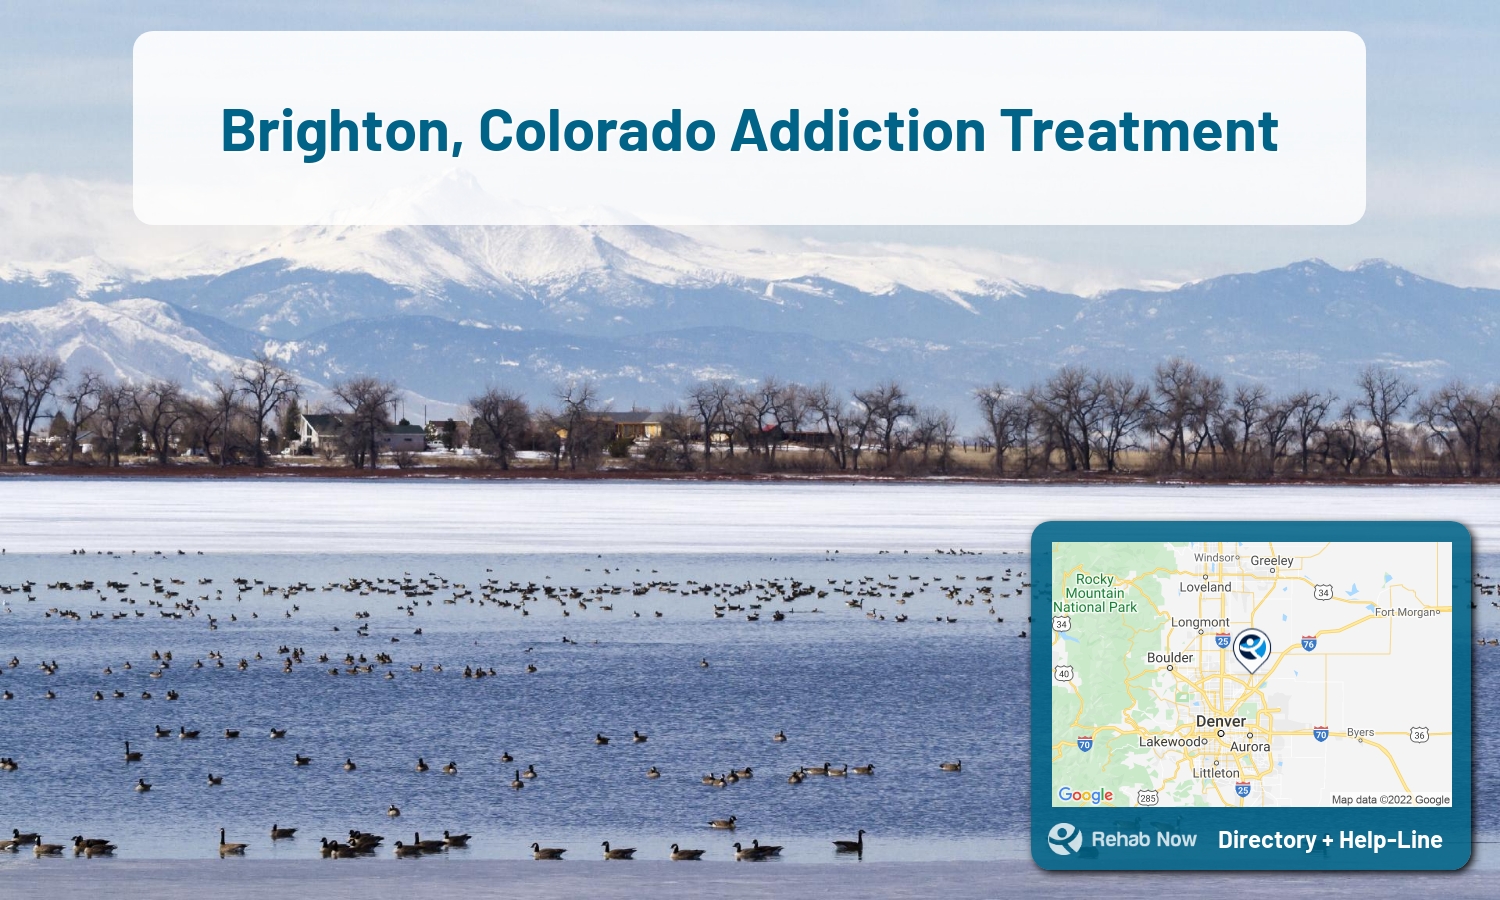 List of alcohol and drug treatment centers near you in Brighton, Colorado. Research certifications, programs, methods, pricing, and more.